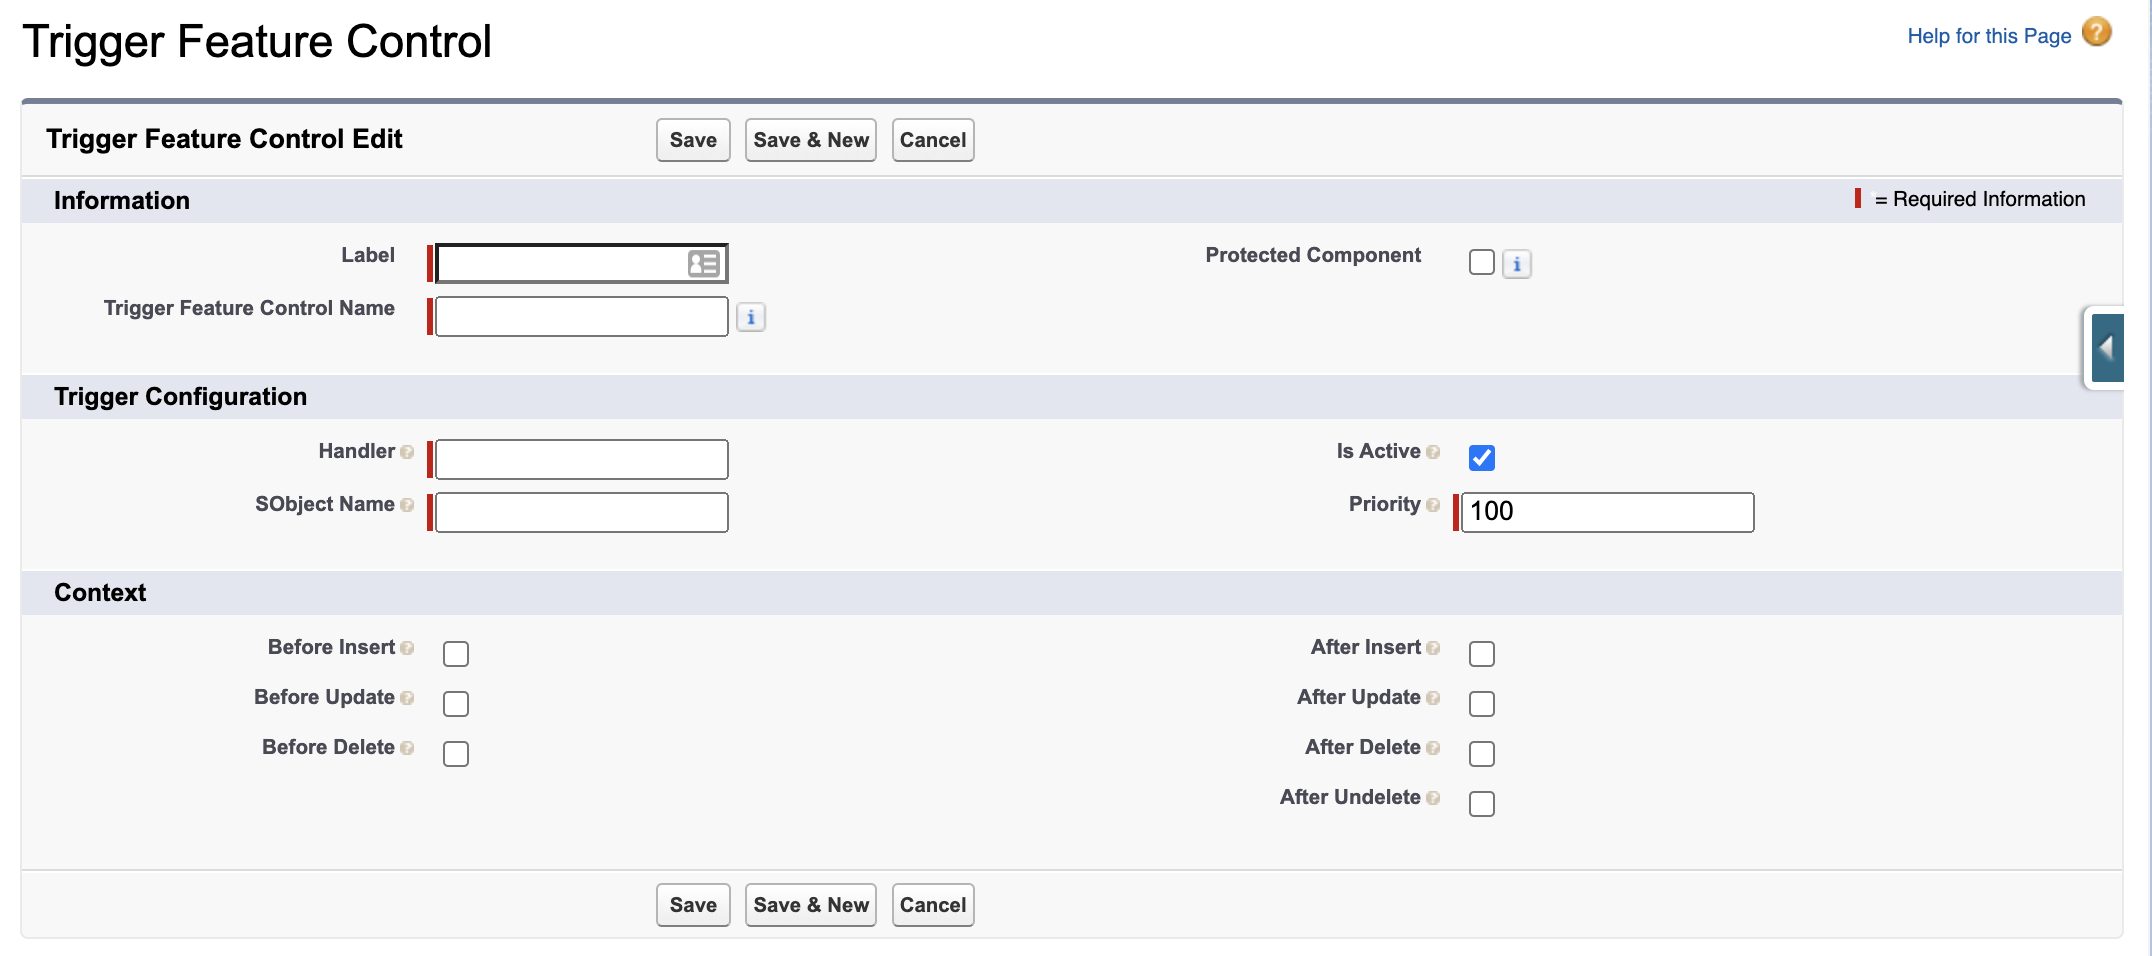 Layout of the trigger feature control custom metadata to register handlers with the framework